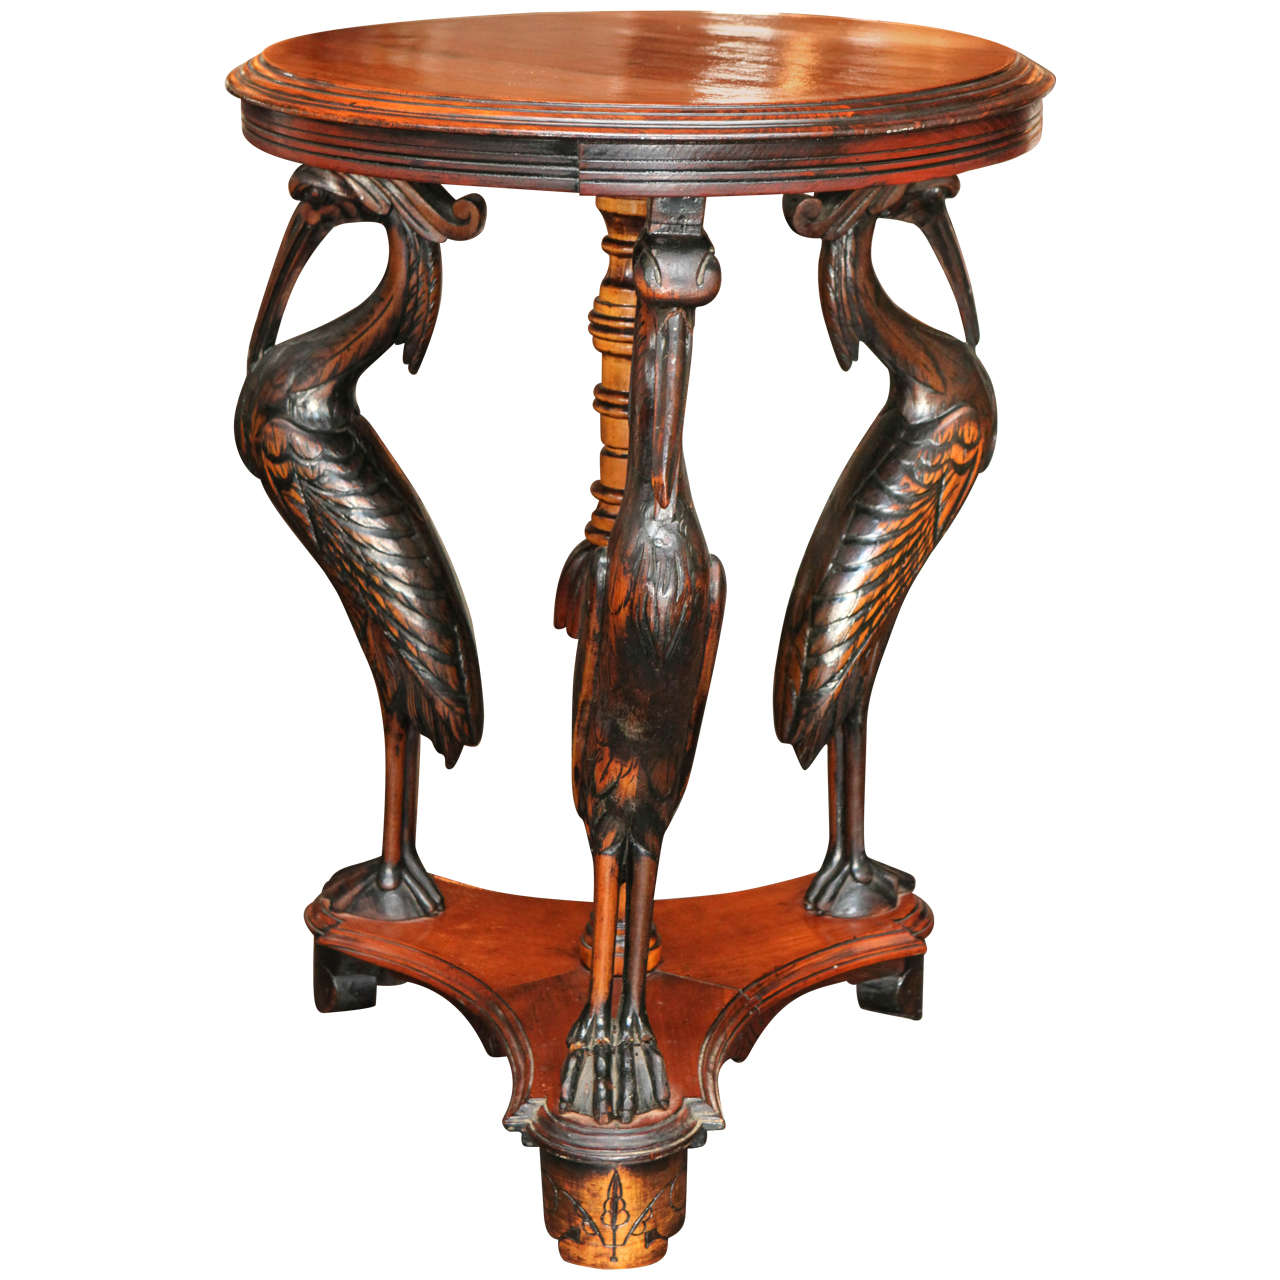 Antique Continental Mixed Wood Center Table